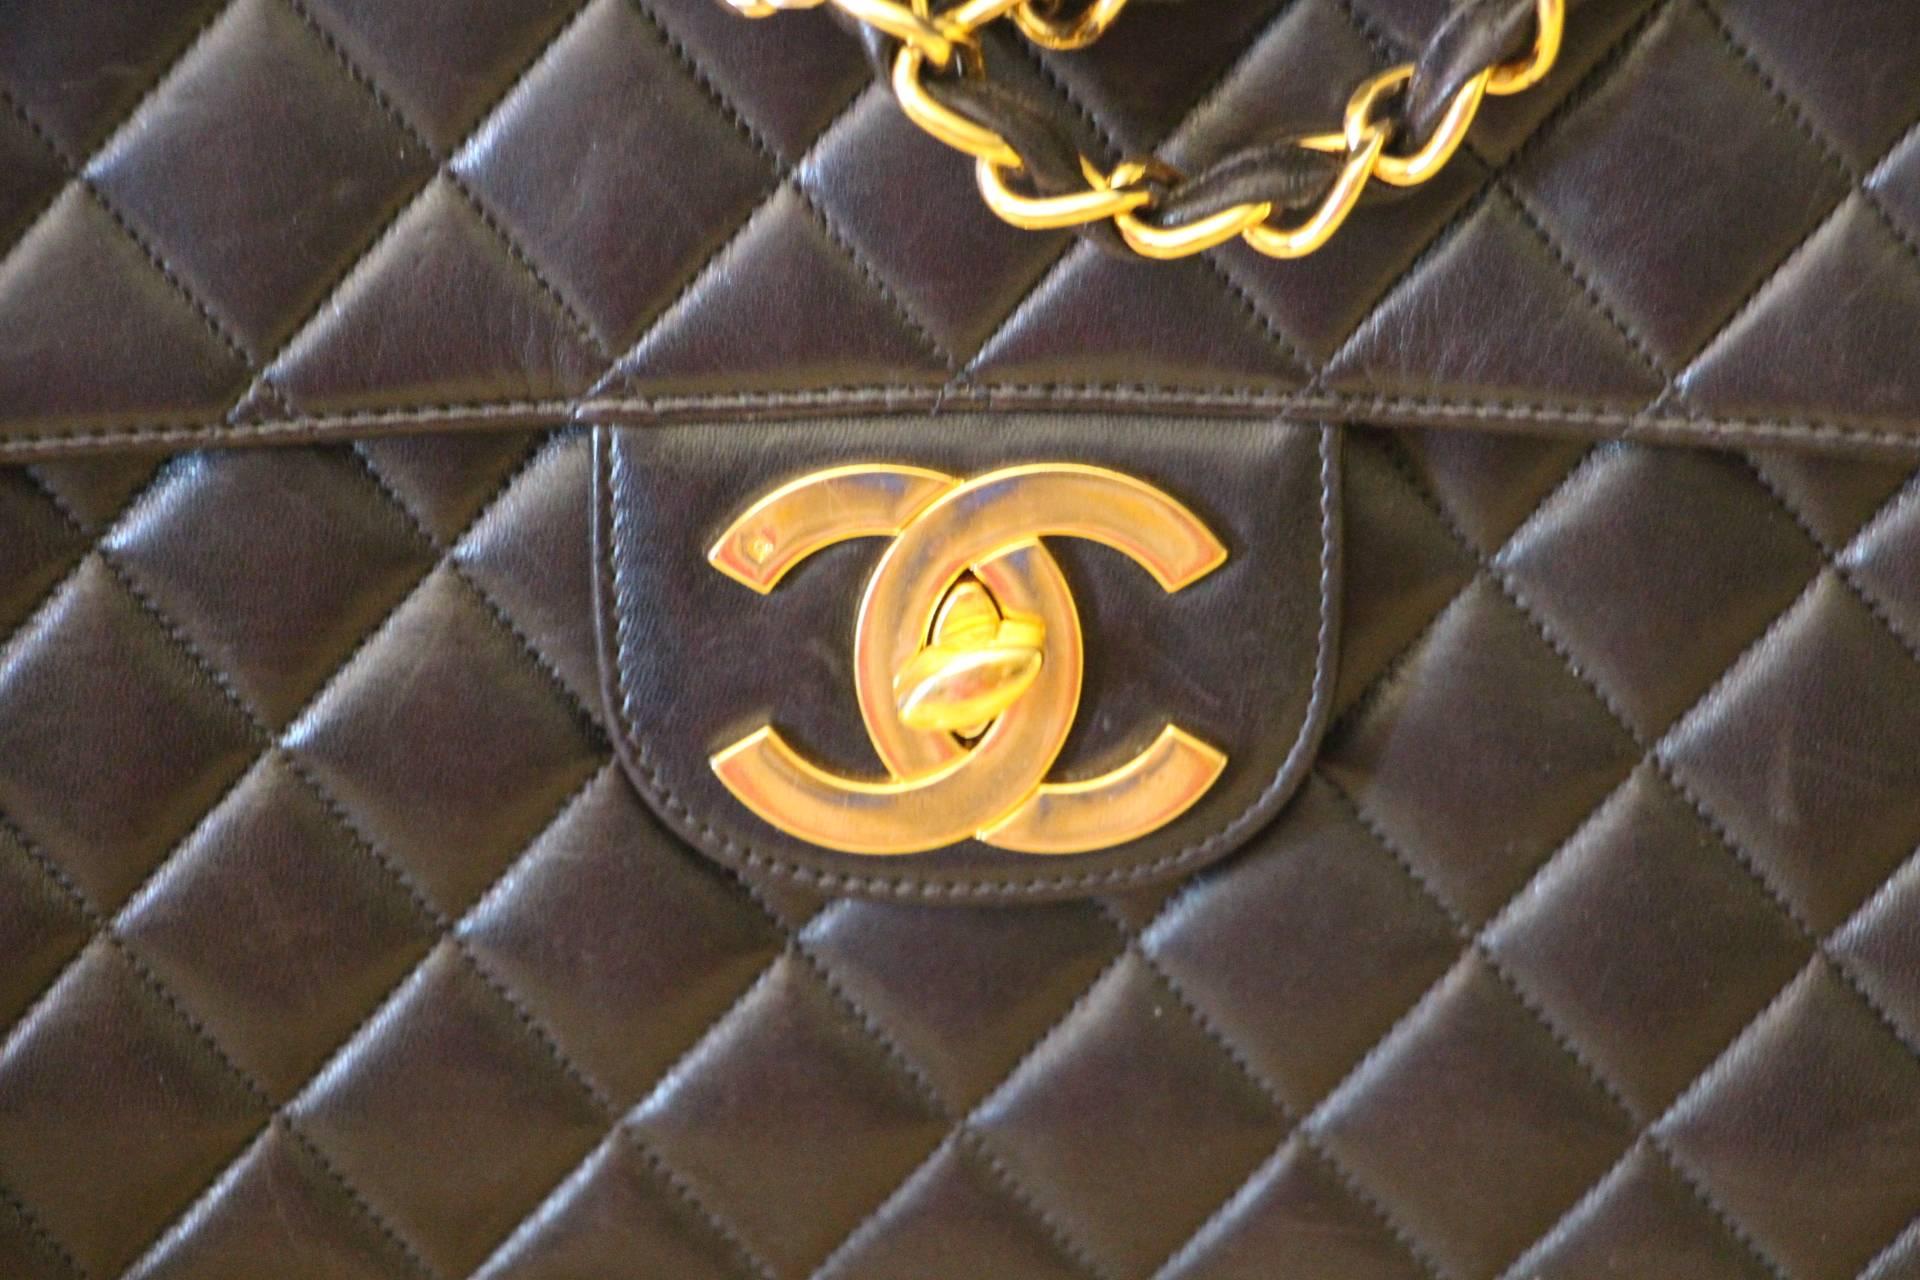 An iconic Chanel jumbo flap bag made of a soft black lambskin leather with bright gold tone hardware.
The classic Chanel chain with gold tone chain links interwoven with black lambskin leather can be worn single or double. Double chain measuring a